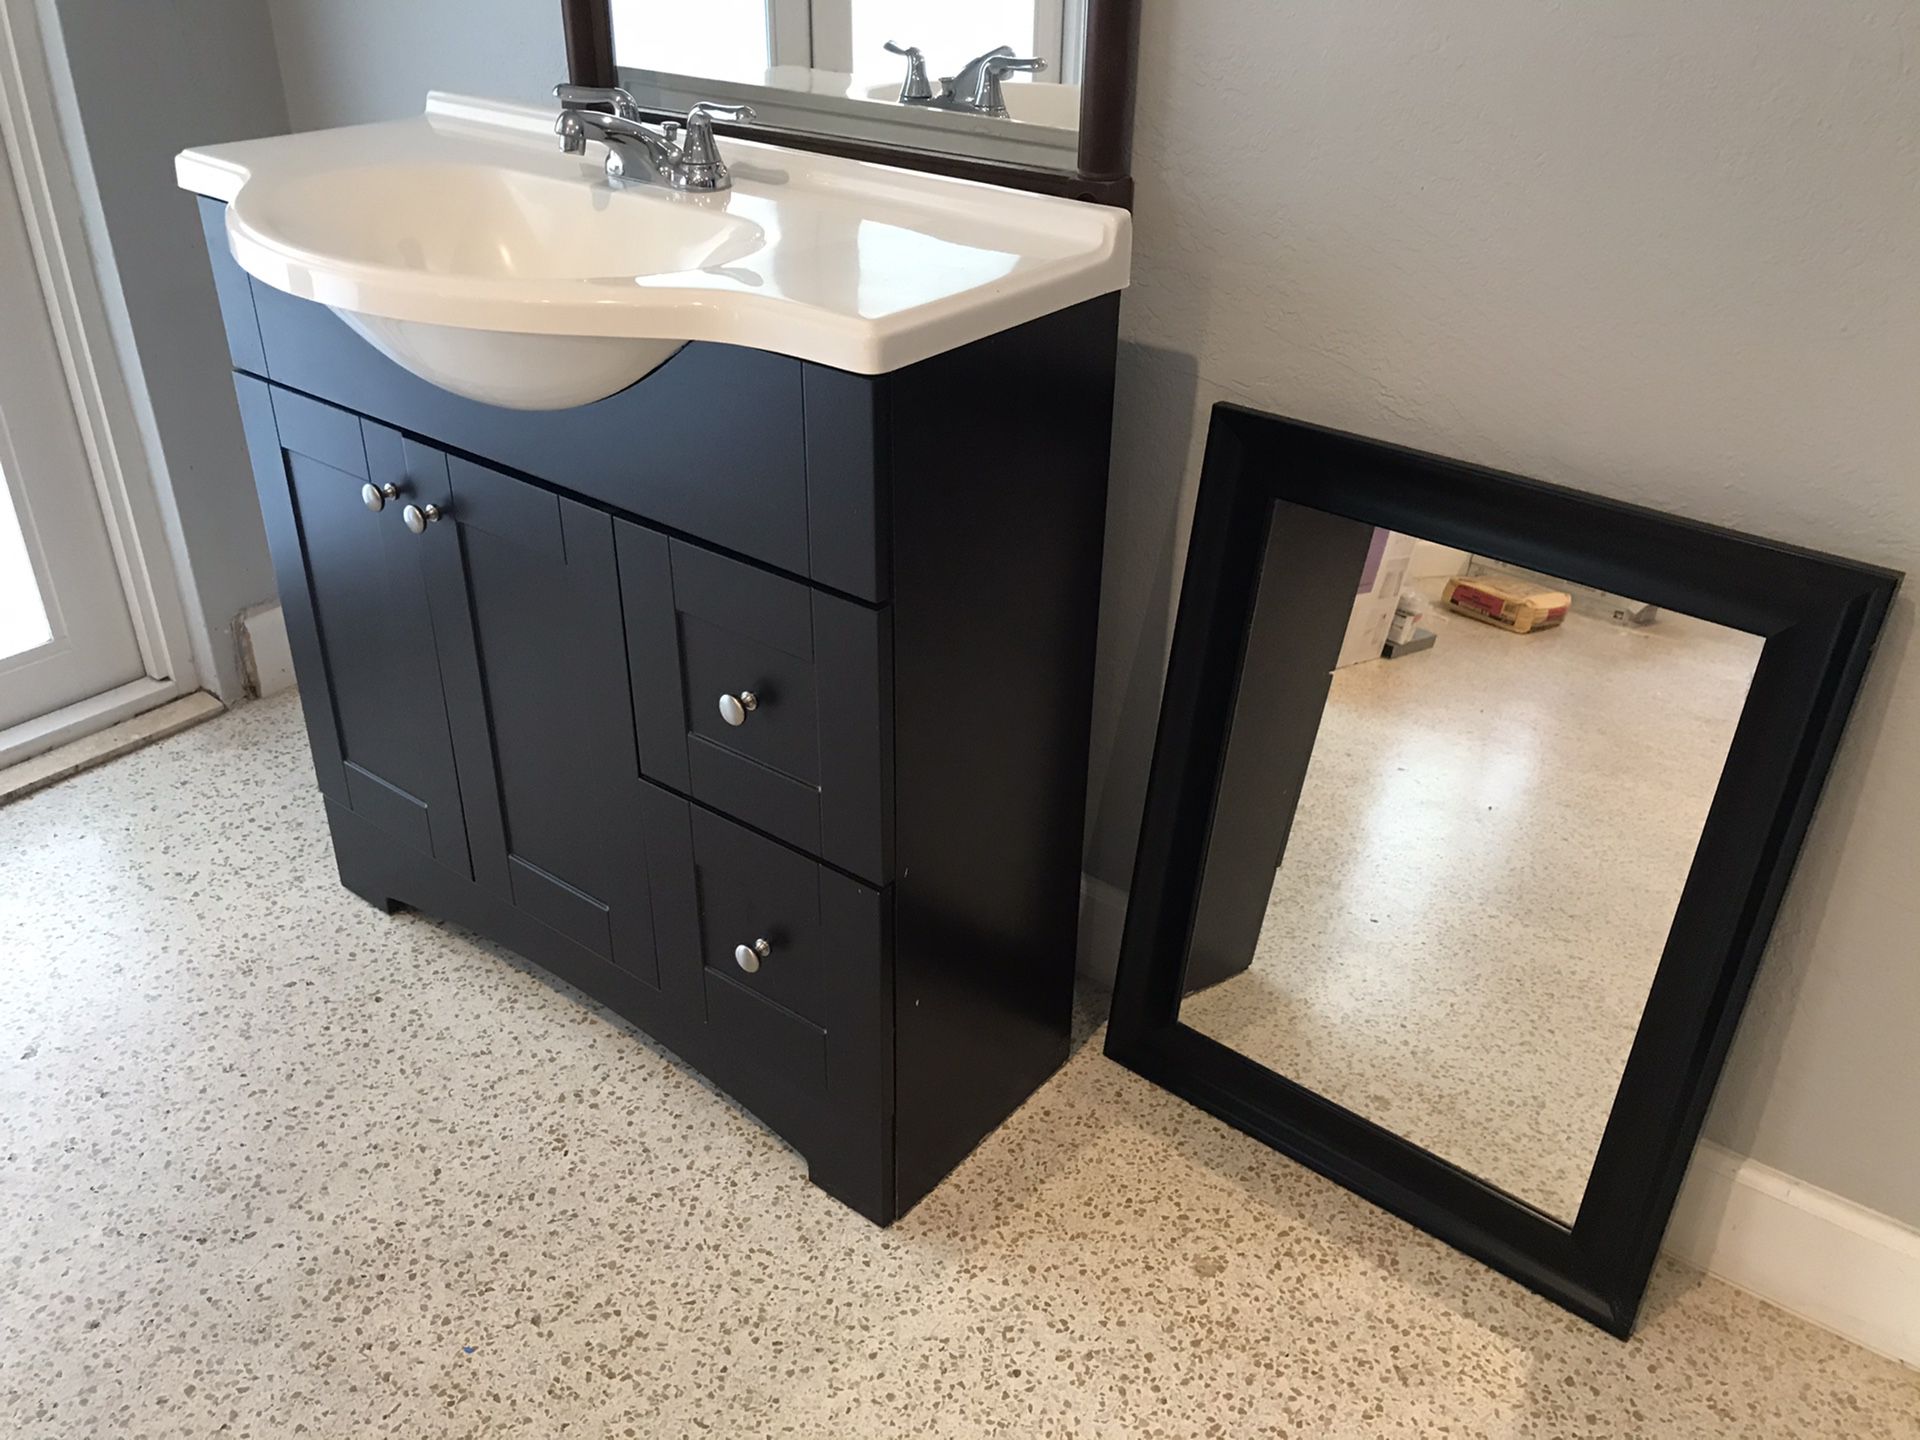 36”espresso vanity with sink, faucet and mirror!